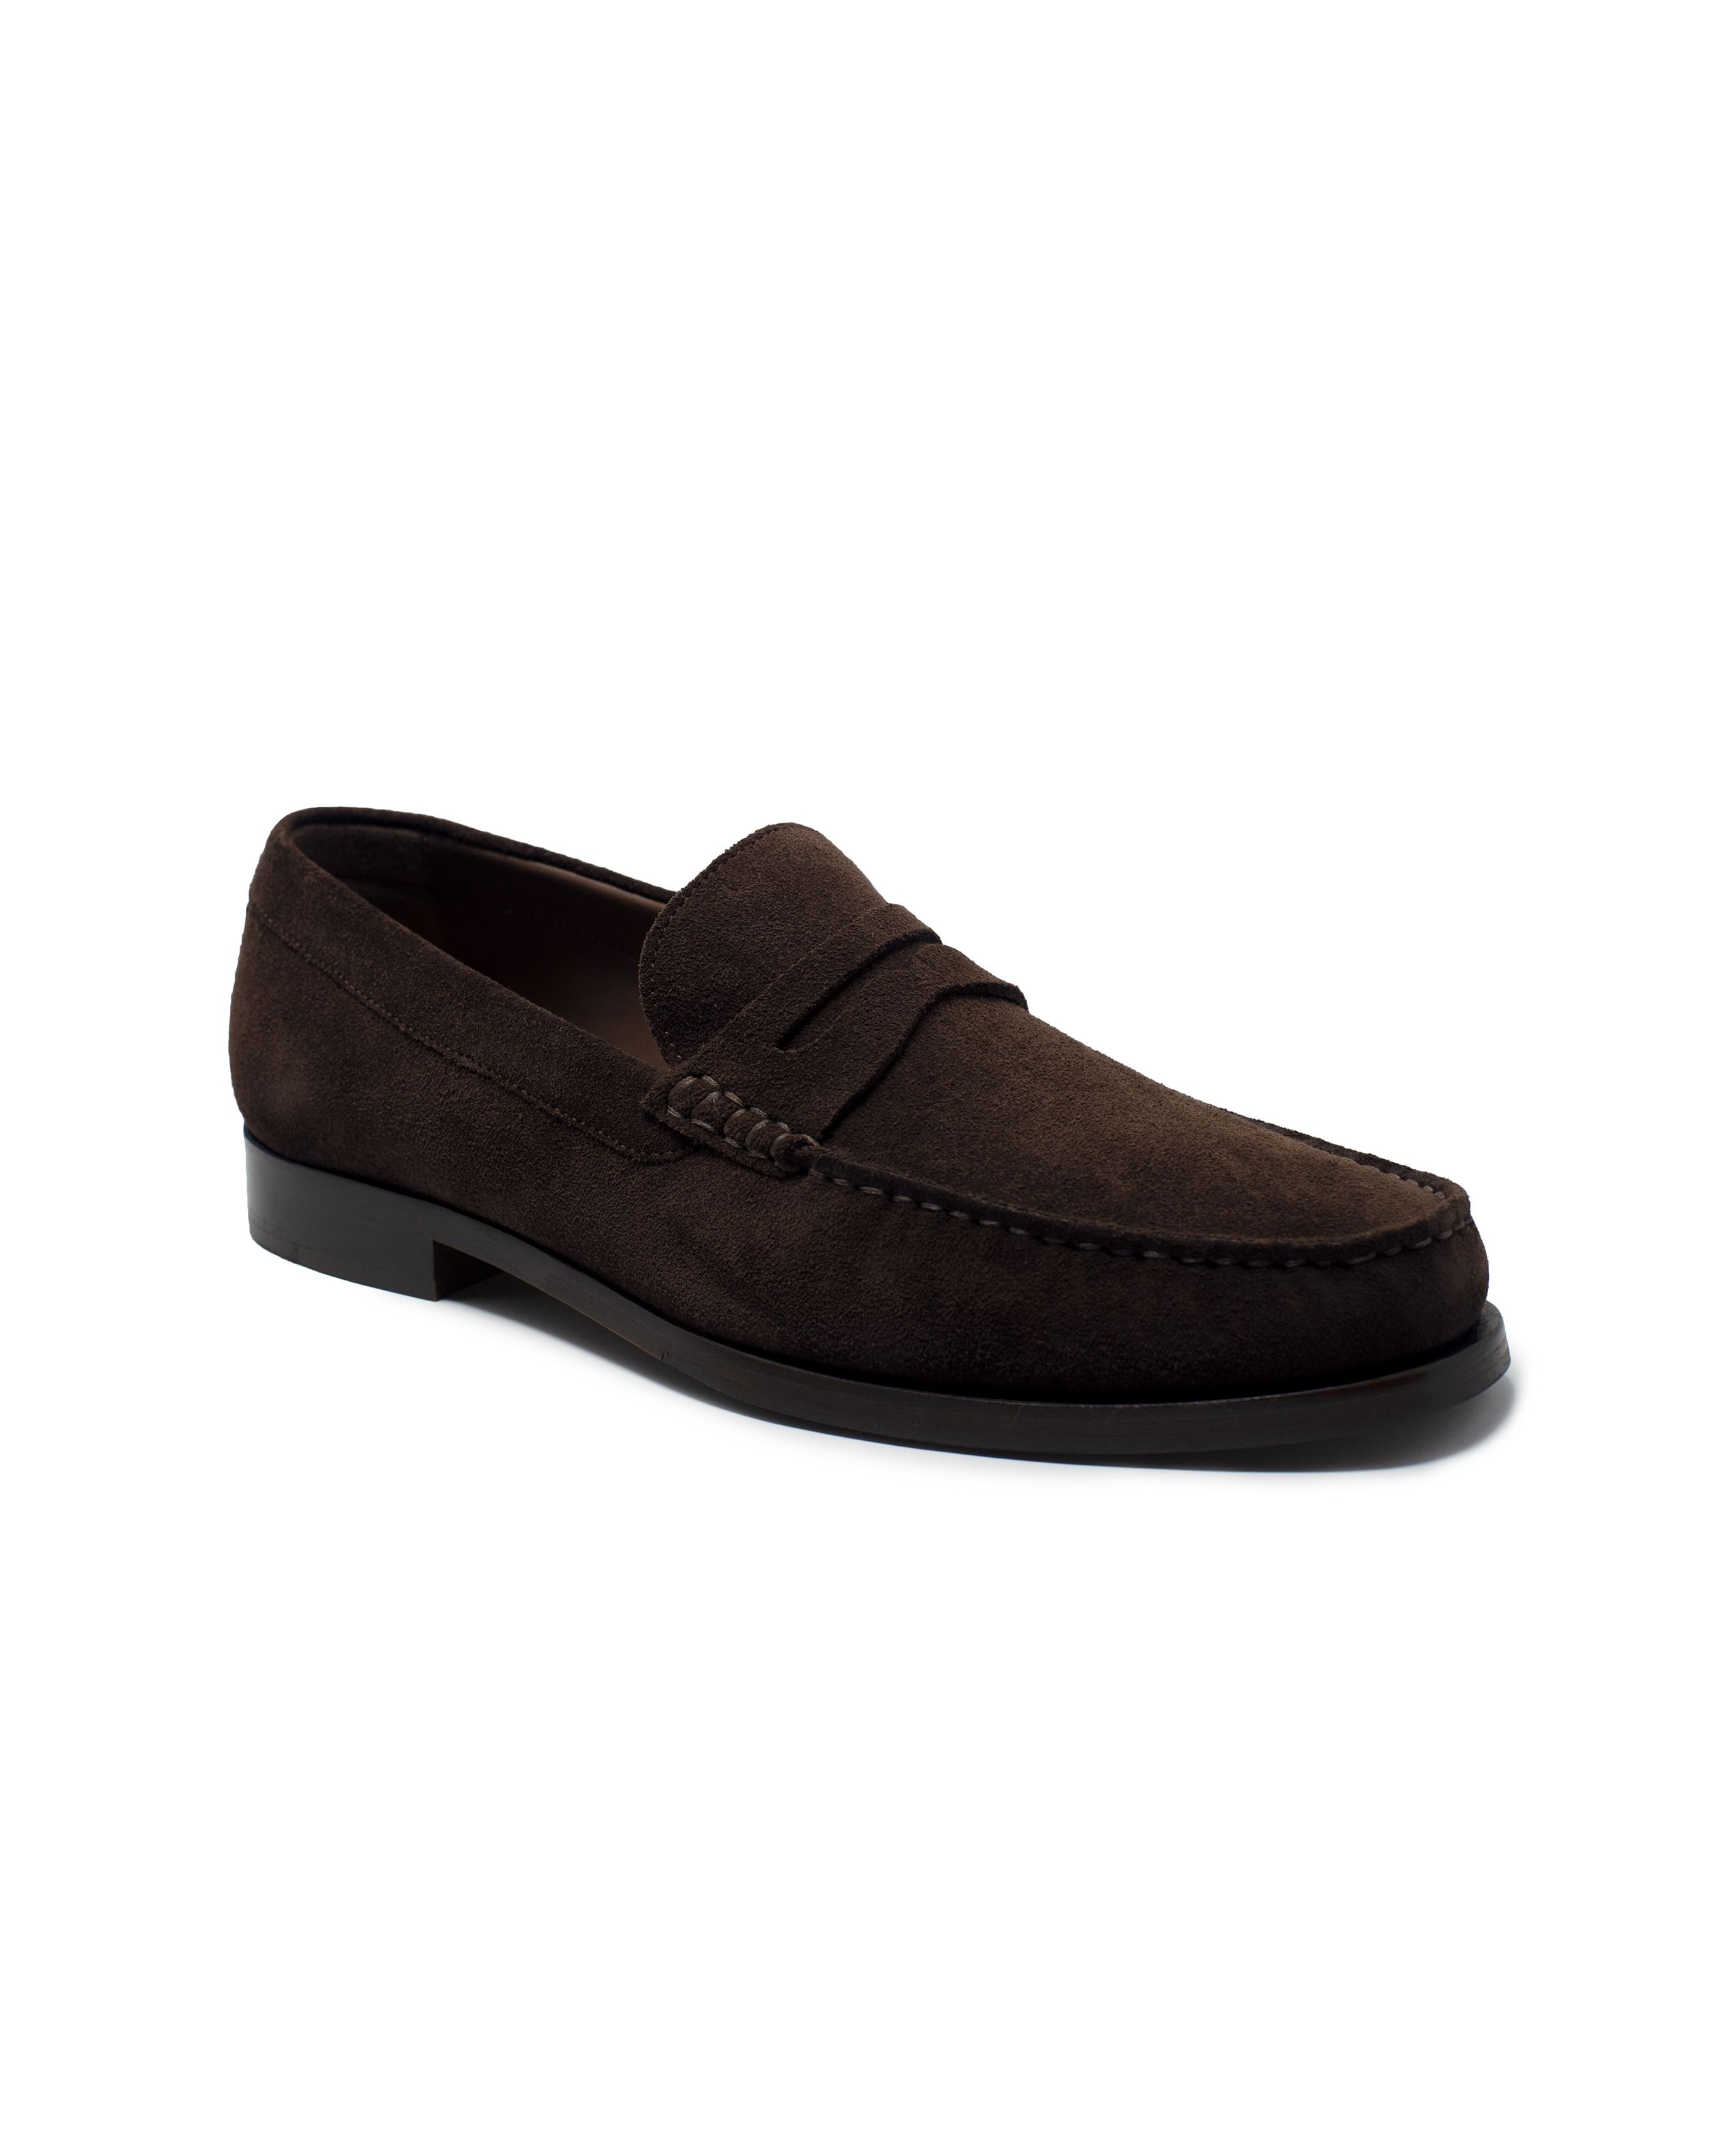 Mens Dark Suede Loafers | Savile Row Co